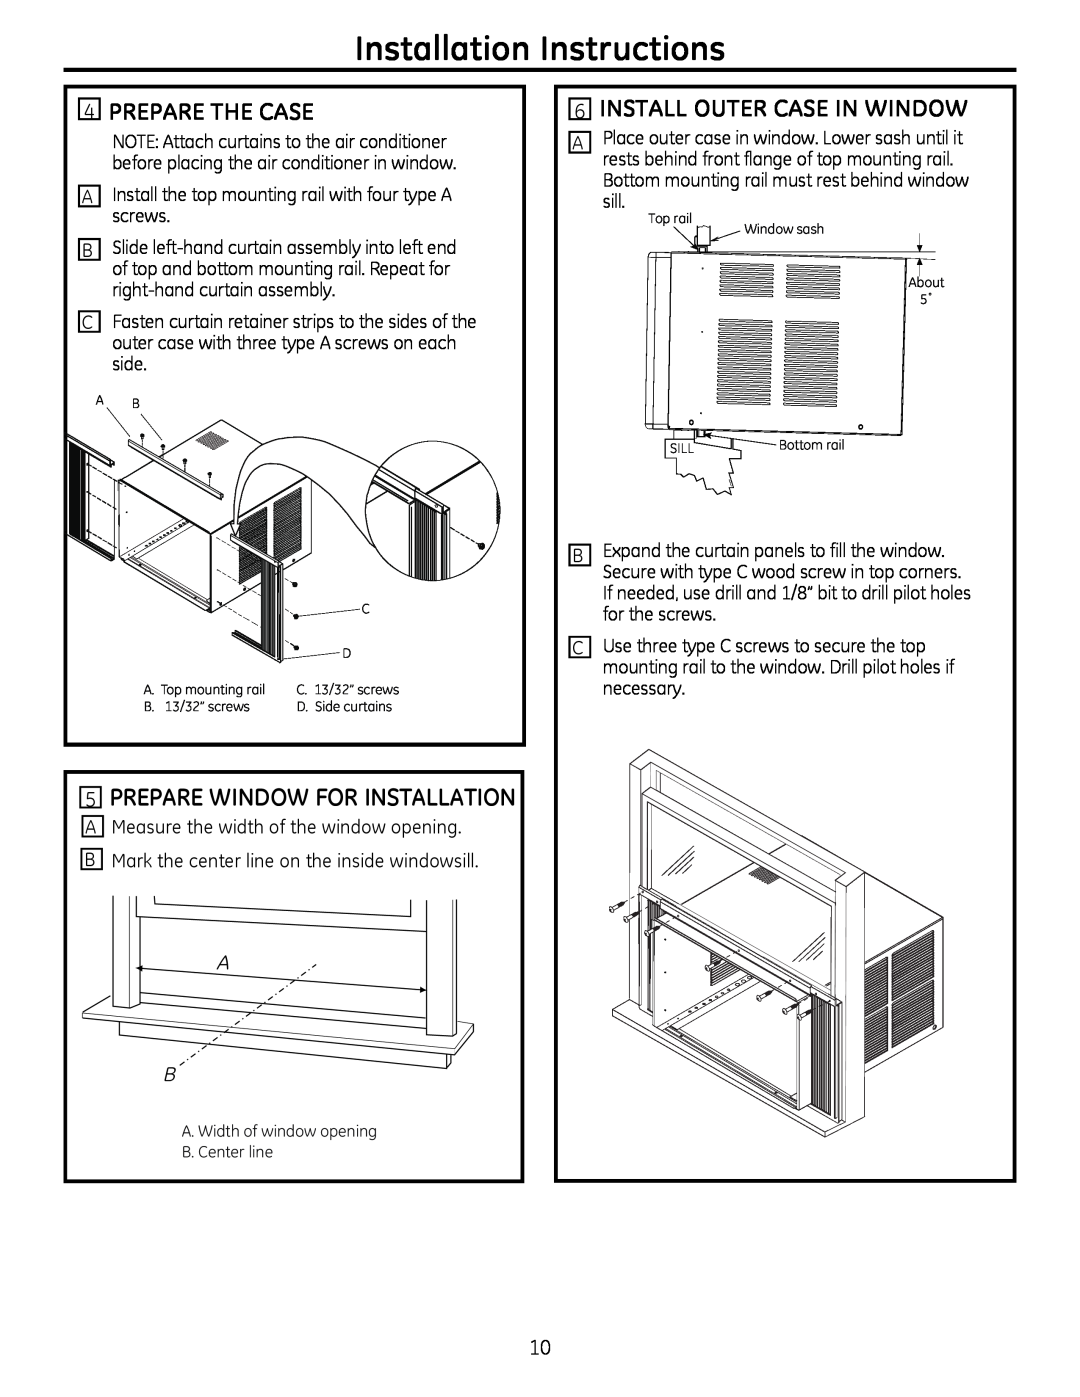 GE AHM24 4PREPARE THE CASE, 6INSTALL OUTER CASE IN WINDOW, 5PREPARE WINDOW FOR INSTALLATION, Installation Instructions 